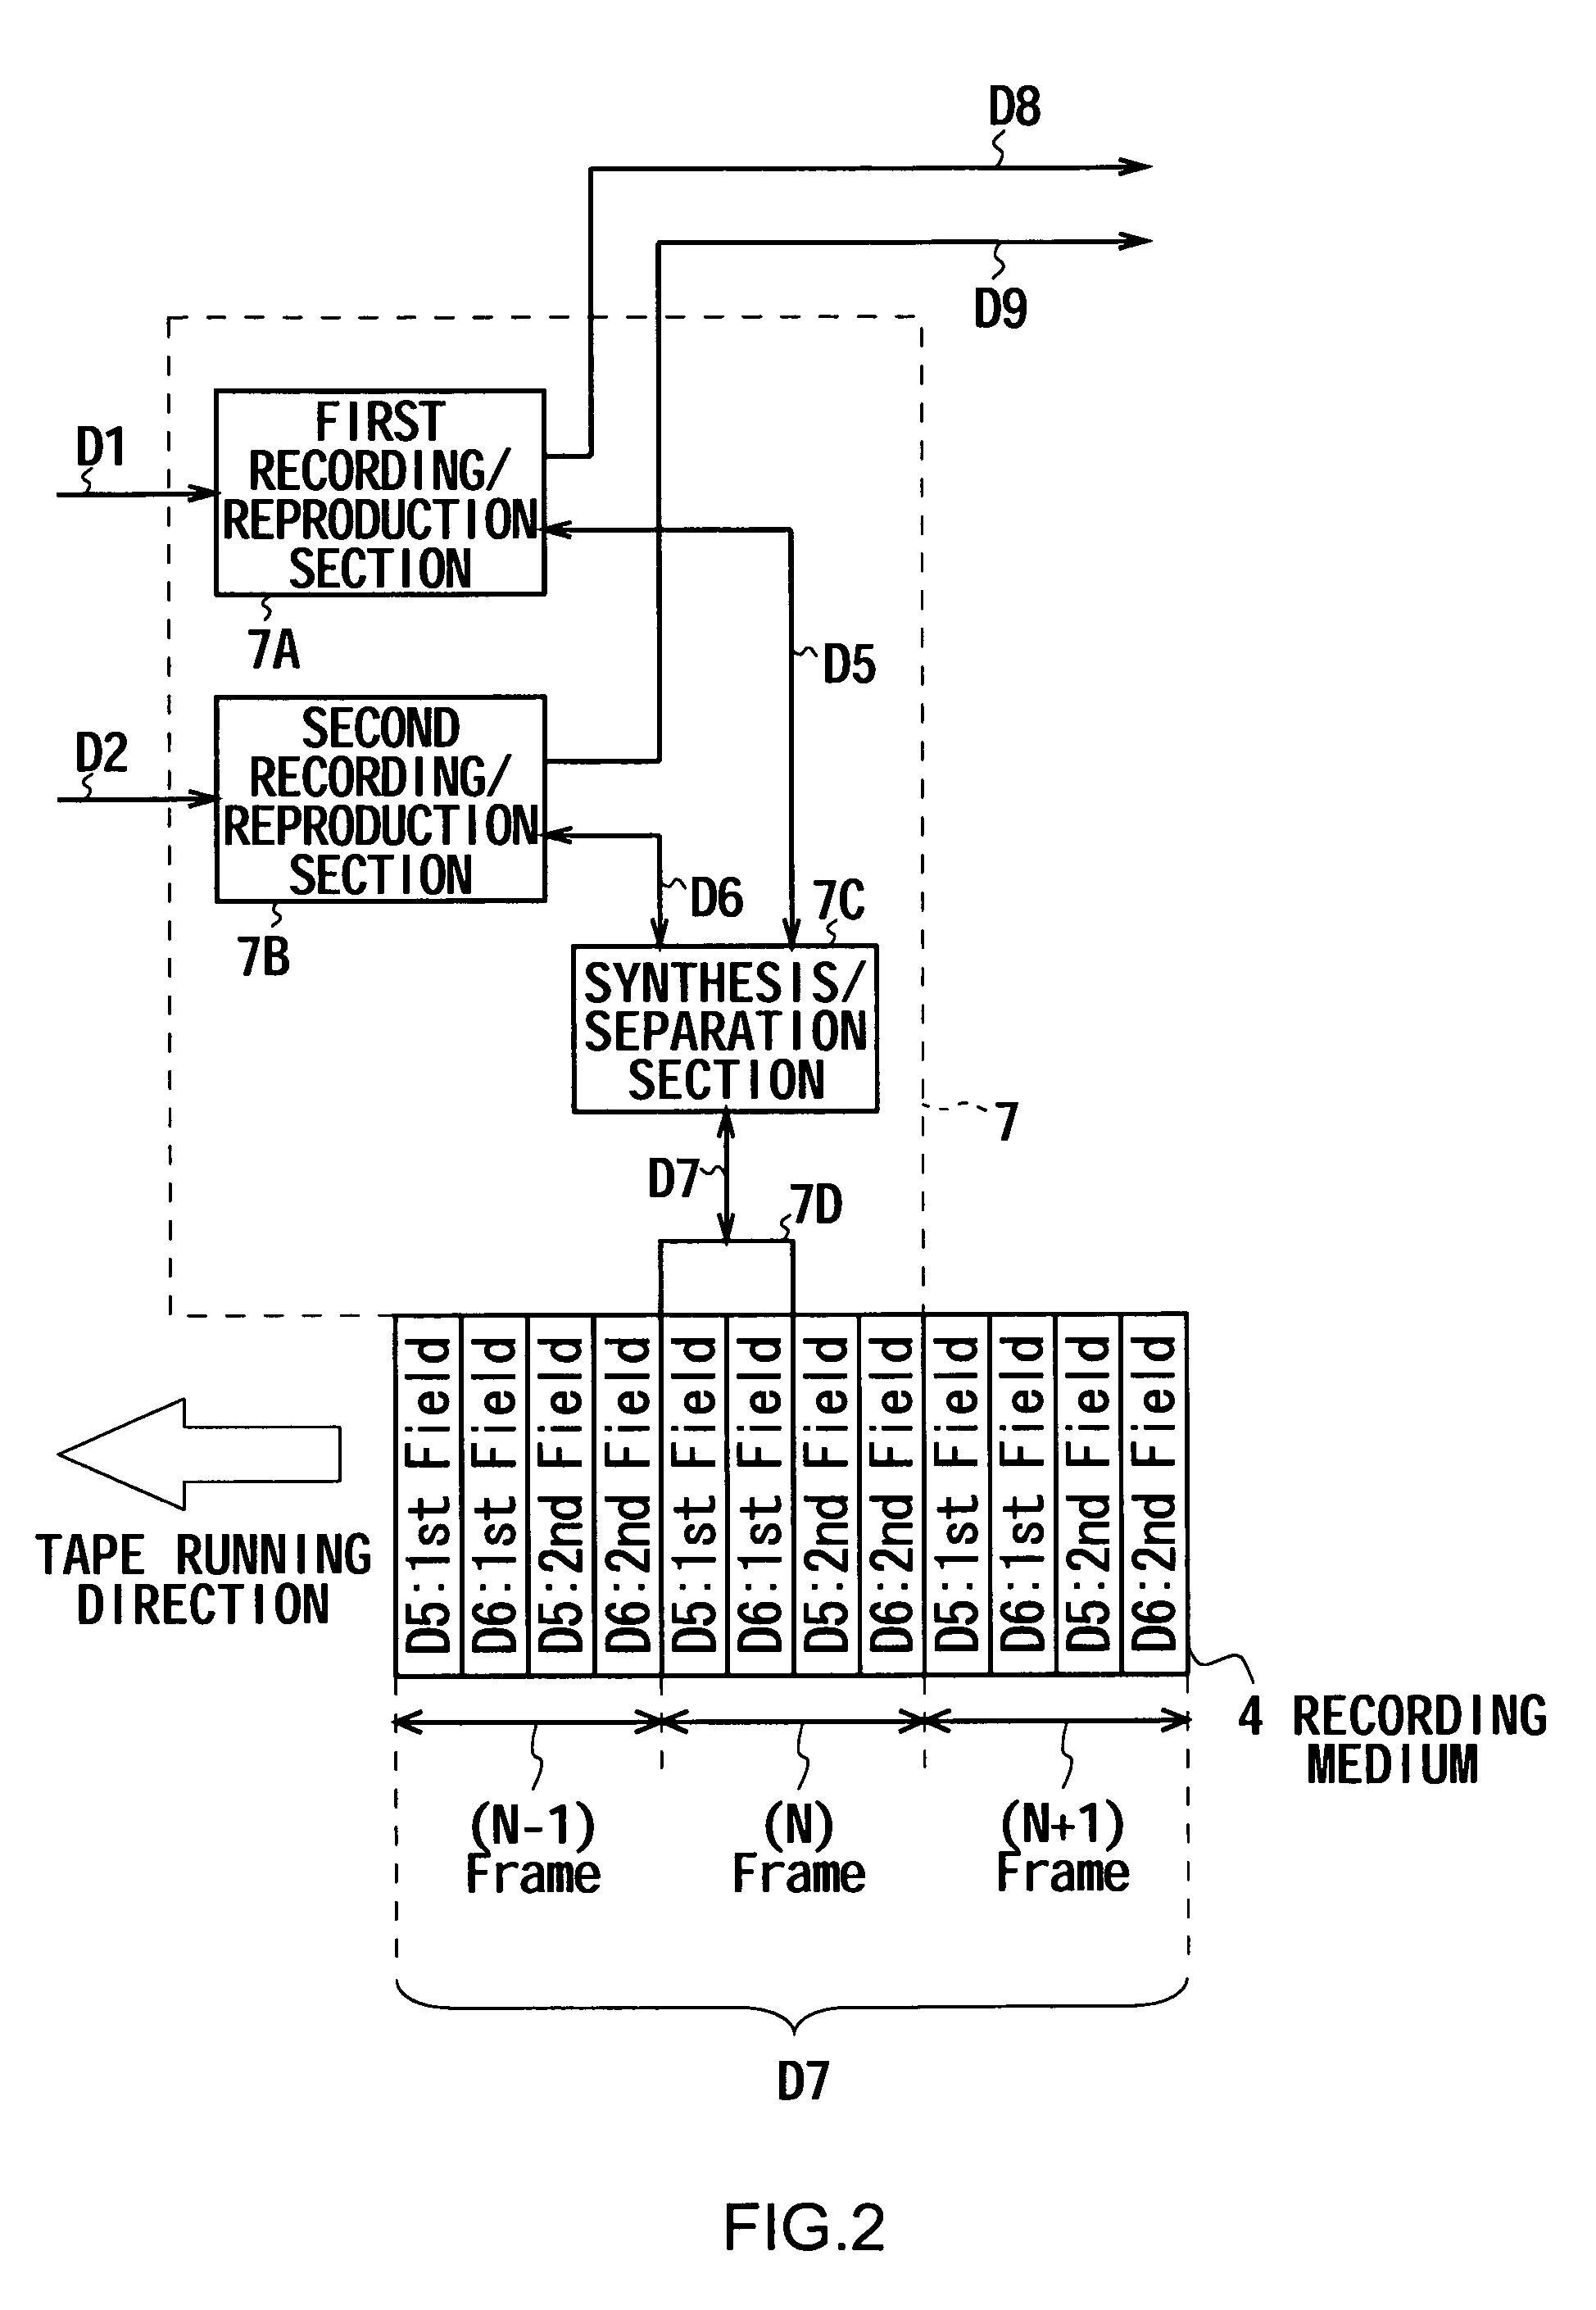 Recording/reproduction apparatus, and recording/reproduction method as well as stereoscopic images visual effects confirmation apparatus and stereoscopic image visual effects confirmation method